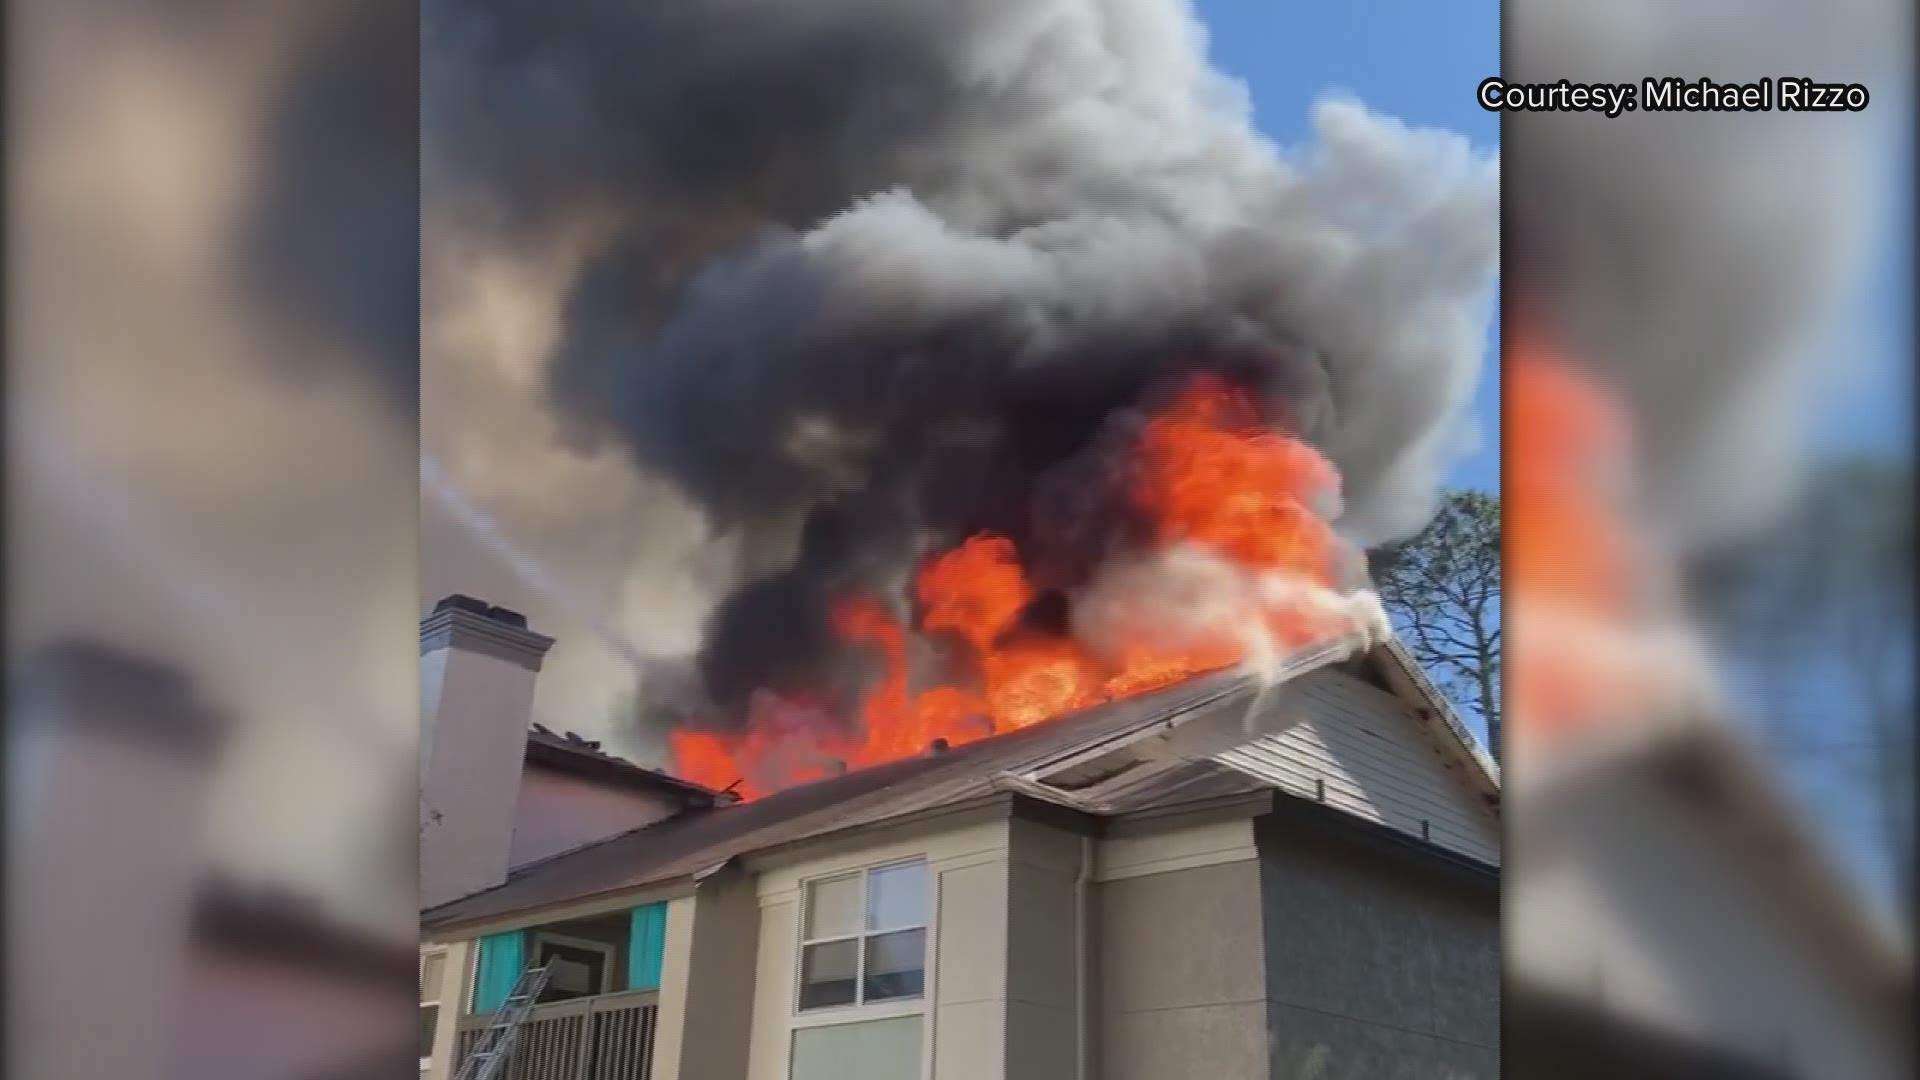 Many residents are displaced after an apartment caught fire in Jacksonville's Deercreek area.